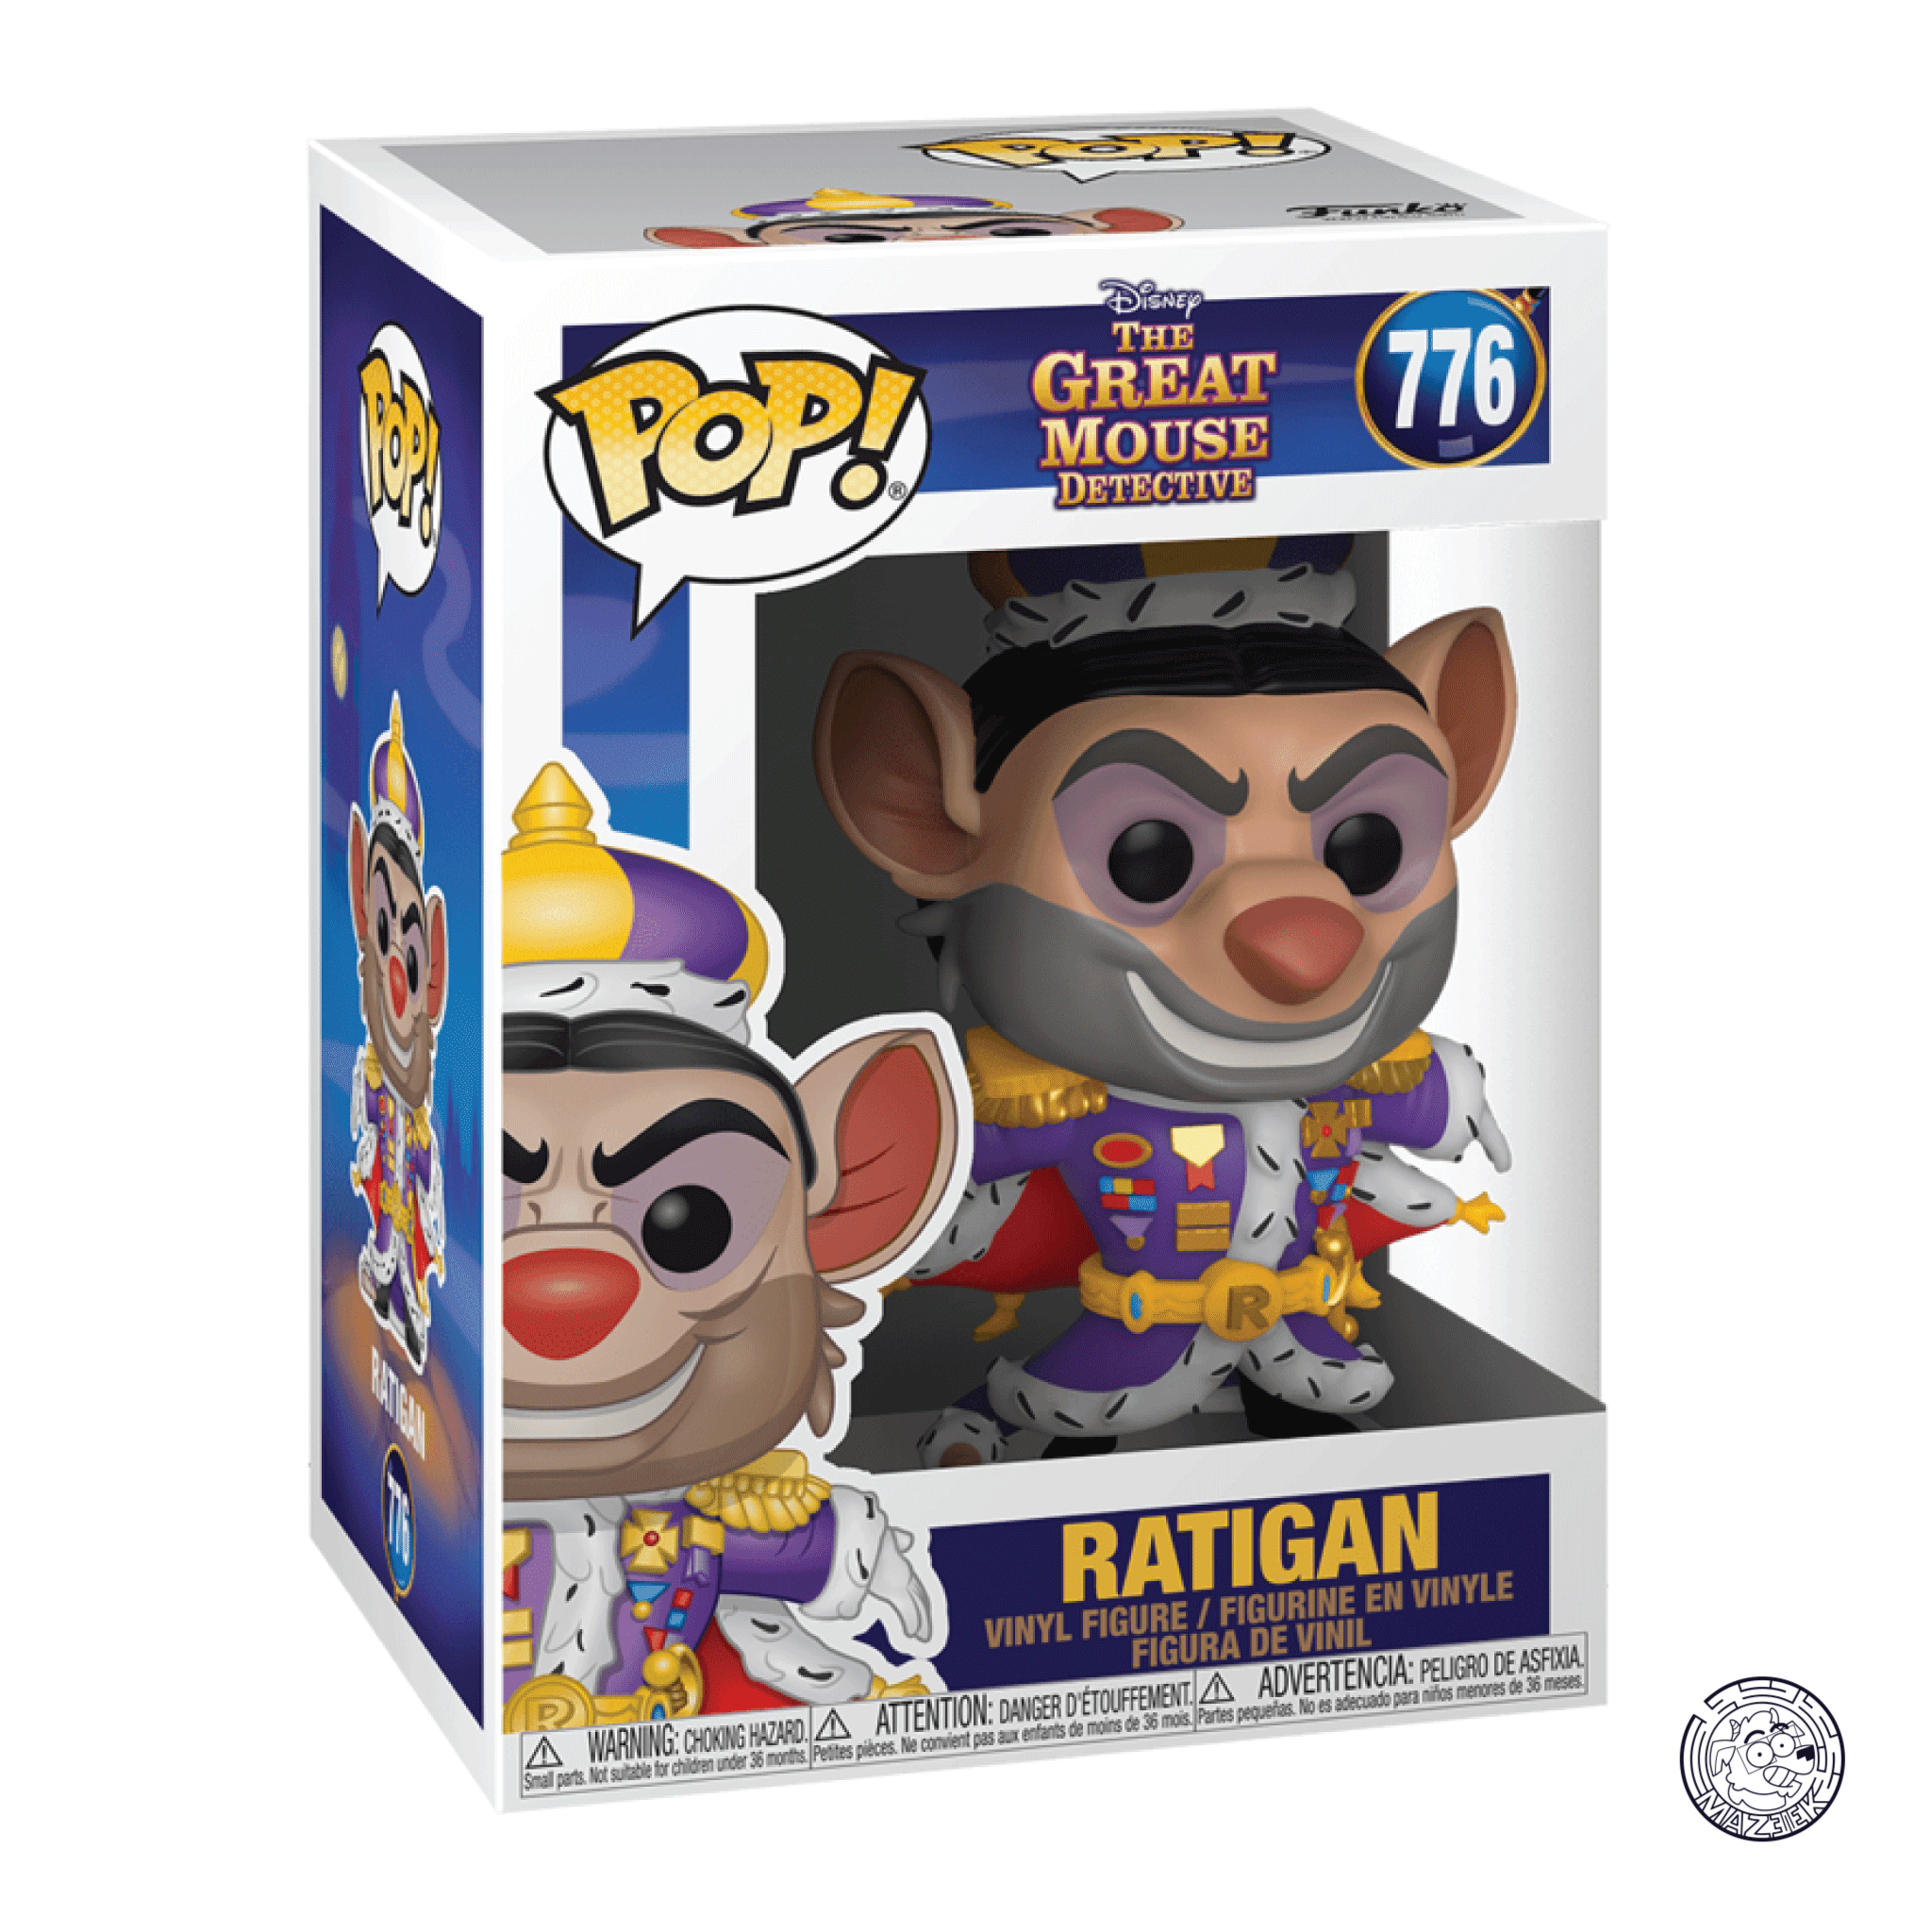 Funko POP! The Great Mouse Detective: Ratigan 776